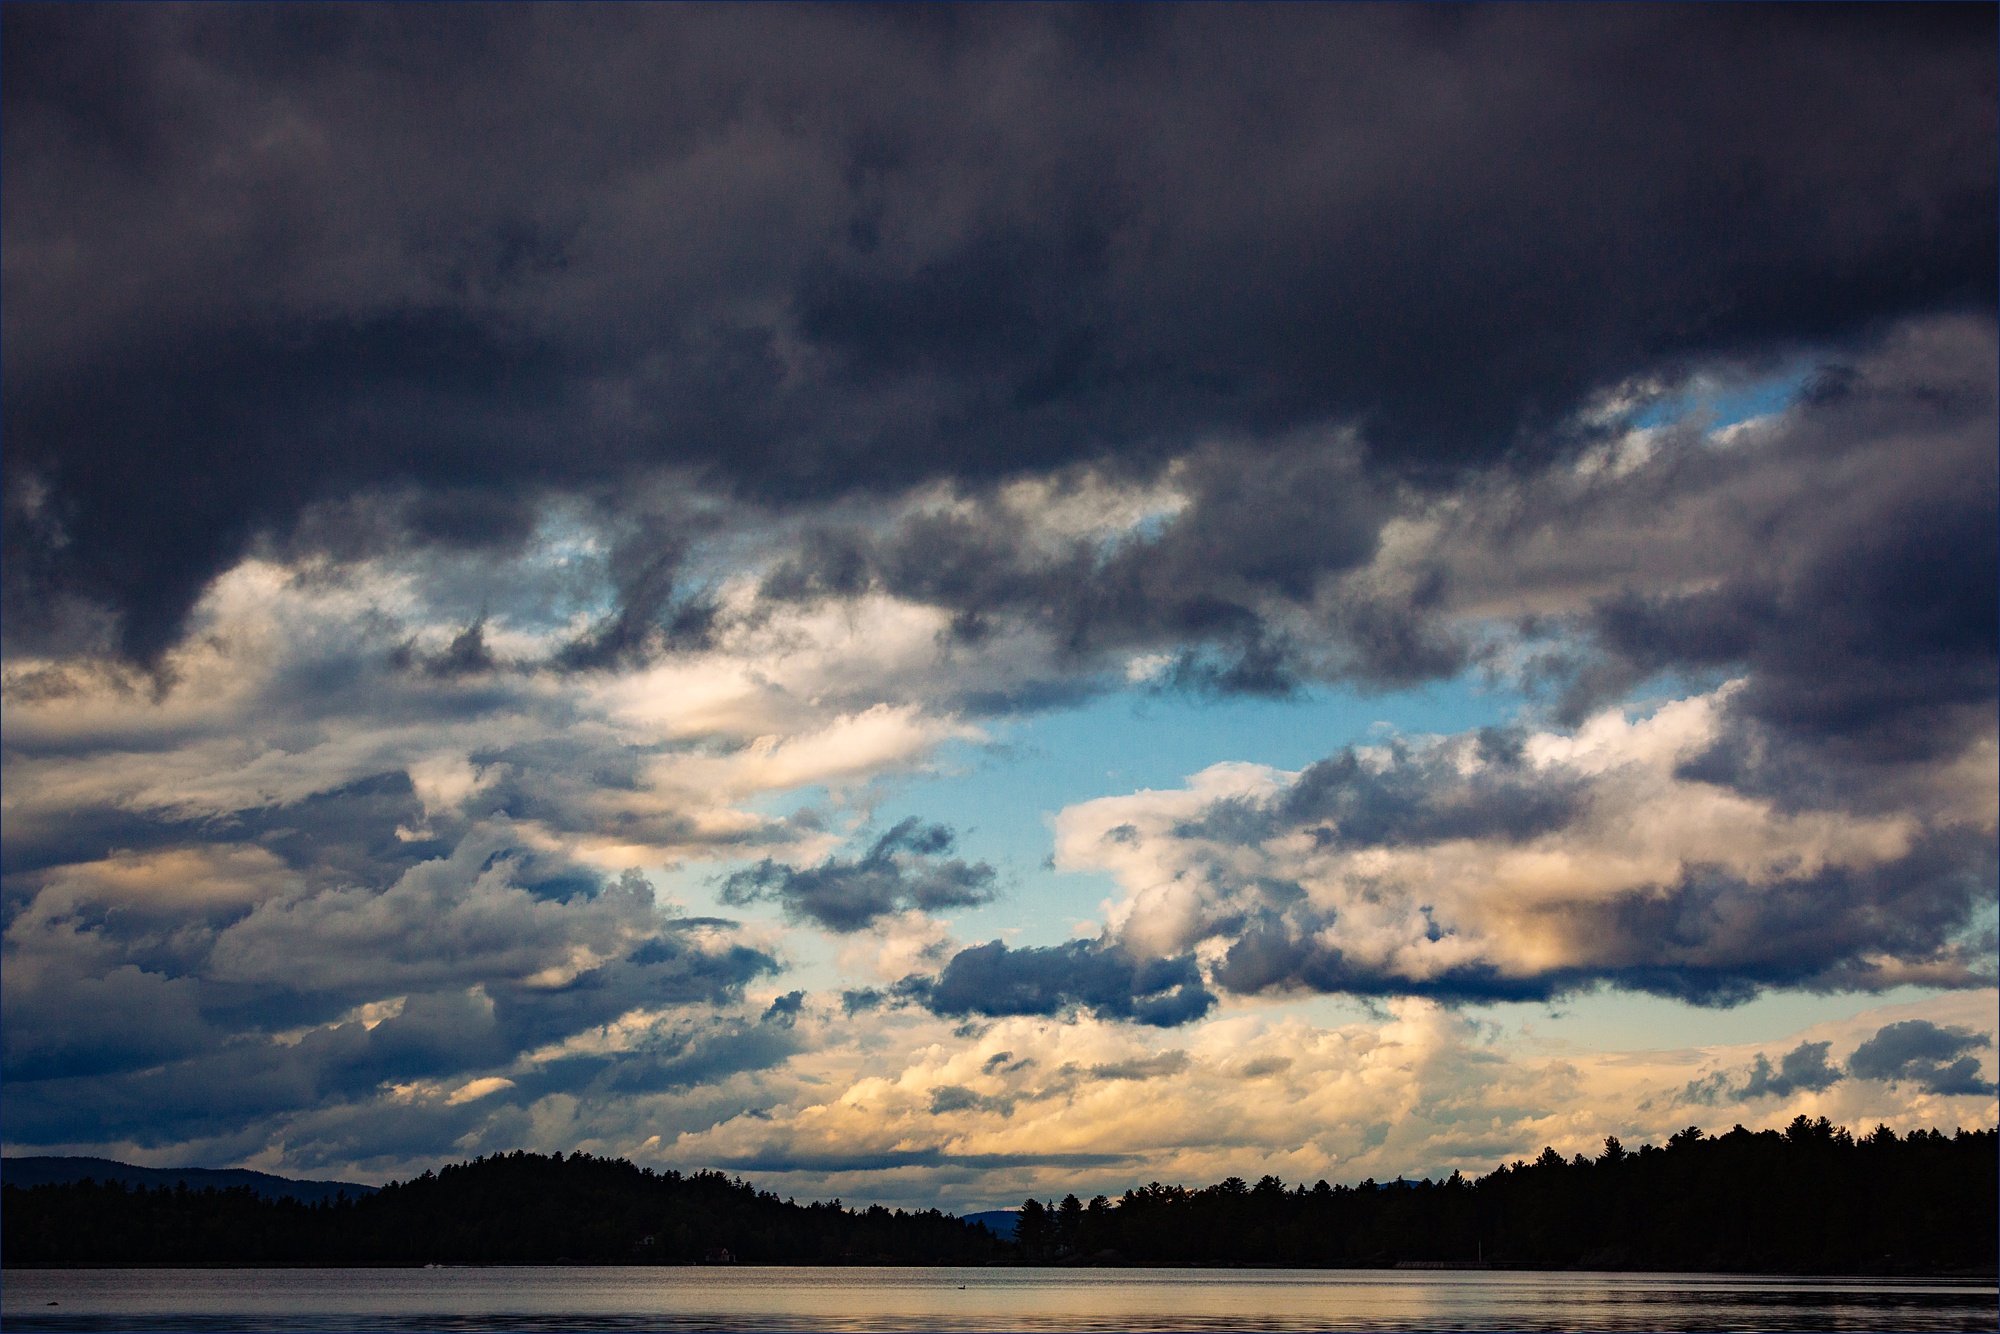 The stormy skies over Mooselookmeguntic Lake and mountains on the Maine wedding day